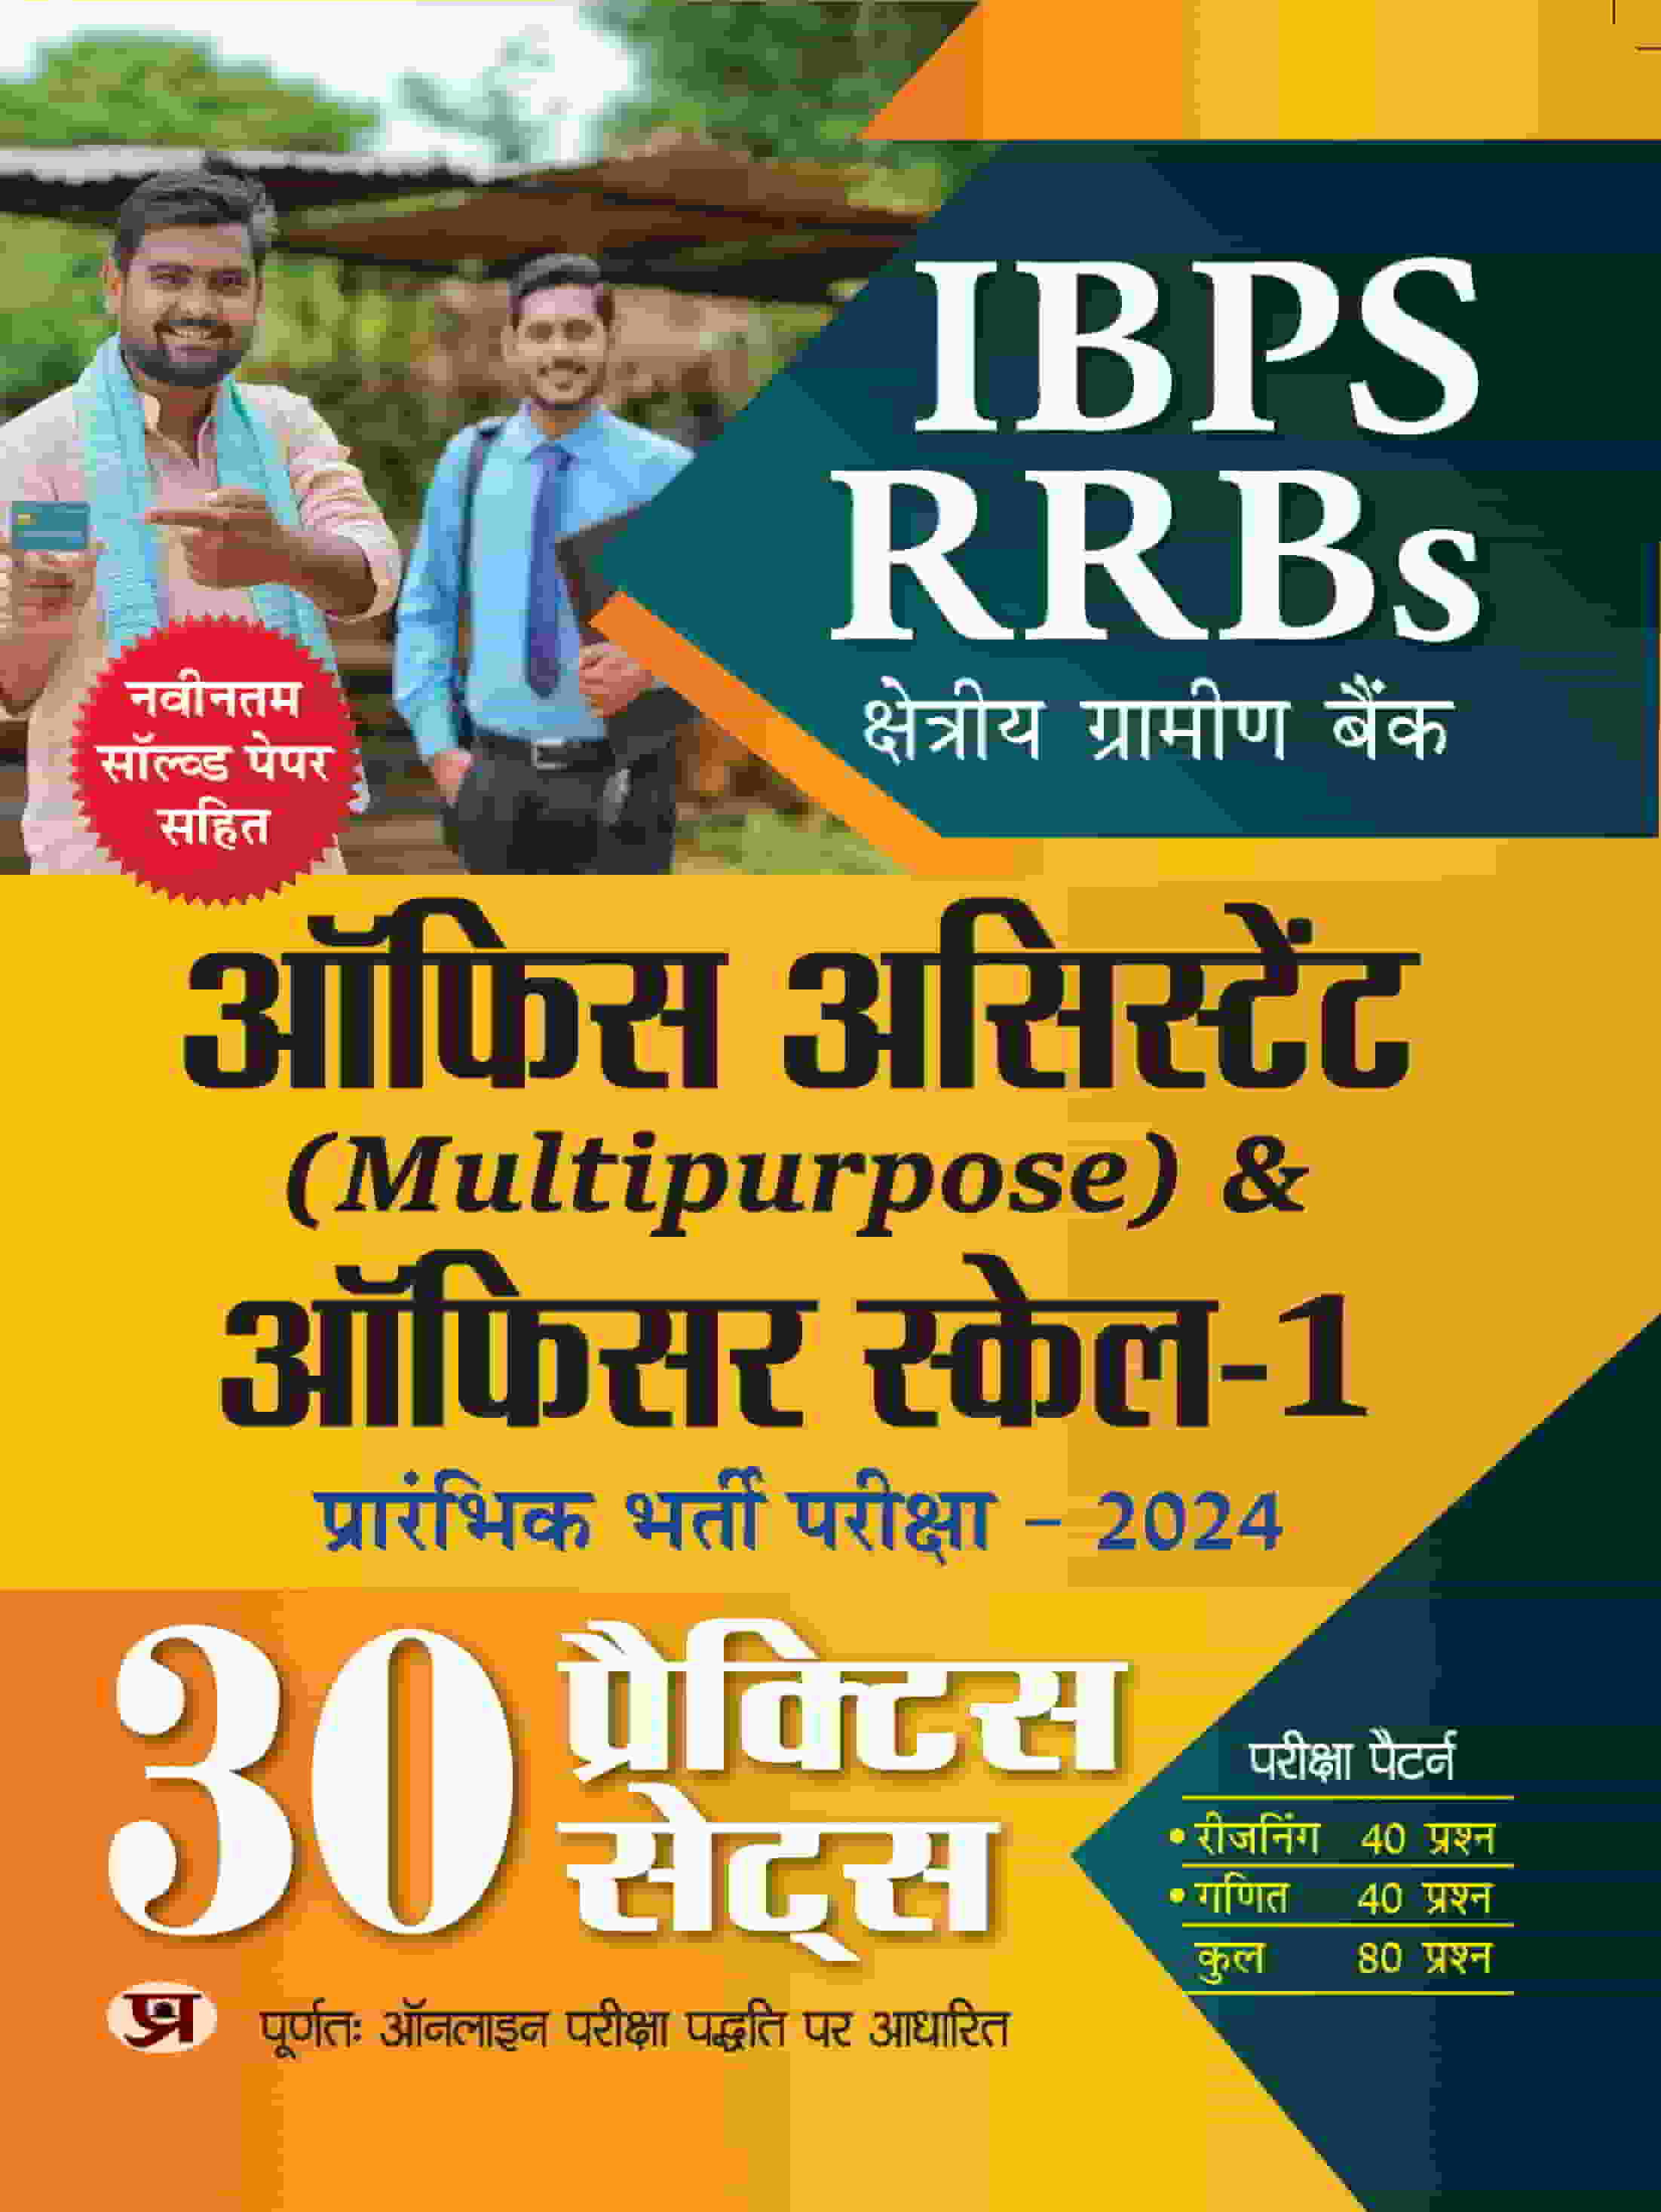 IBPS RRBs Office Assistant (Multipurpose) & Officer Scale-1 Prarambhik Bharti Pareeksha-2024 30 Practice Sets | Includes Latest Solved Papers (Regional Rural Bank) Based On Online Exam Pattern